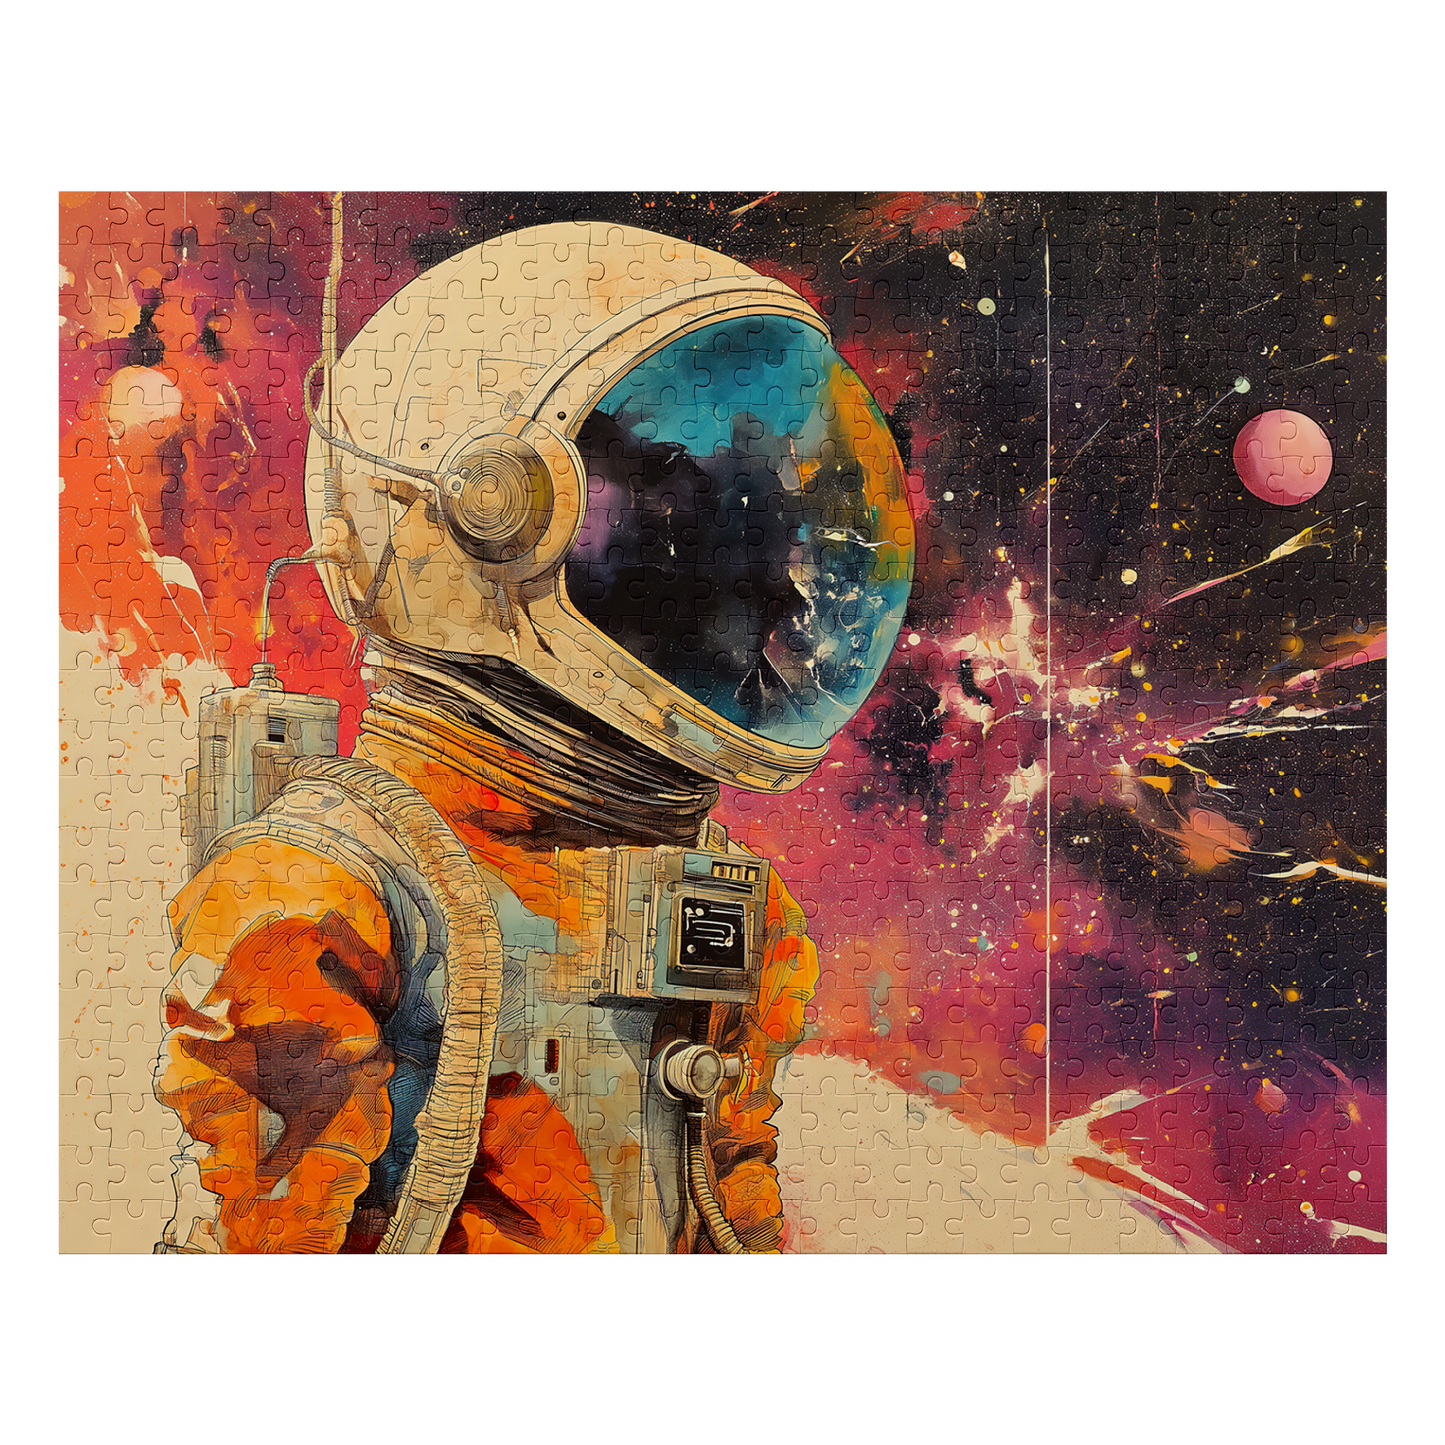 Wandering - Premium Jigsaw Puzzle, Vibrant, Sci-fi Multiple Sizes Available